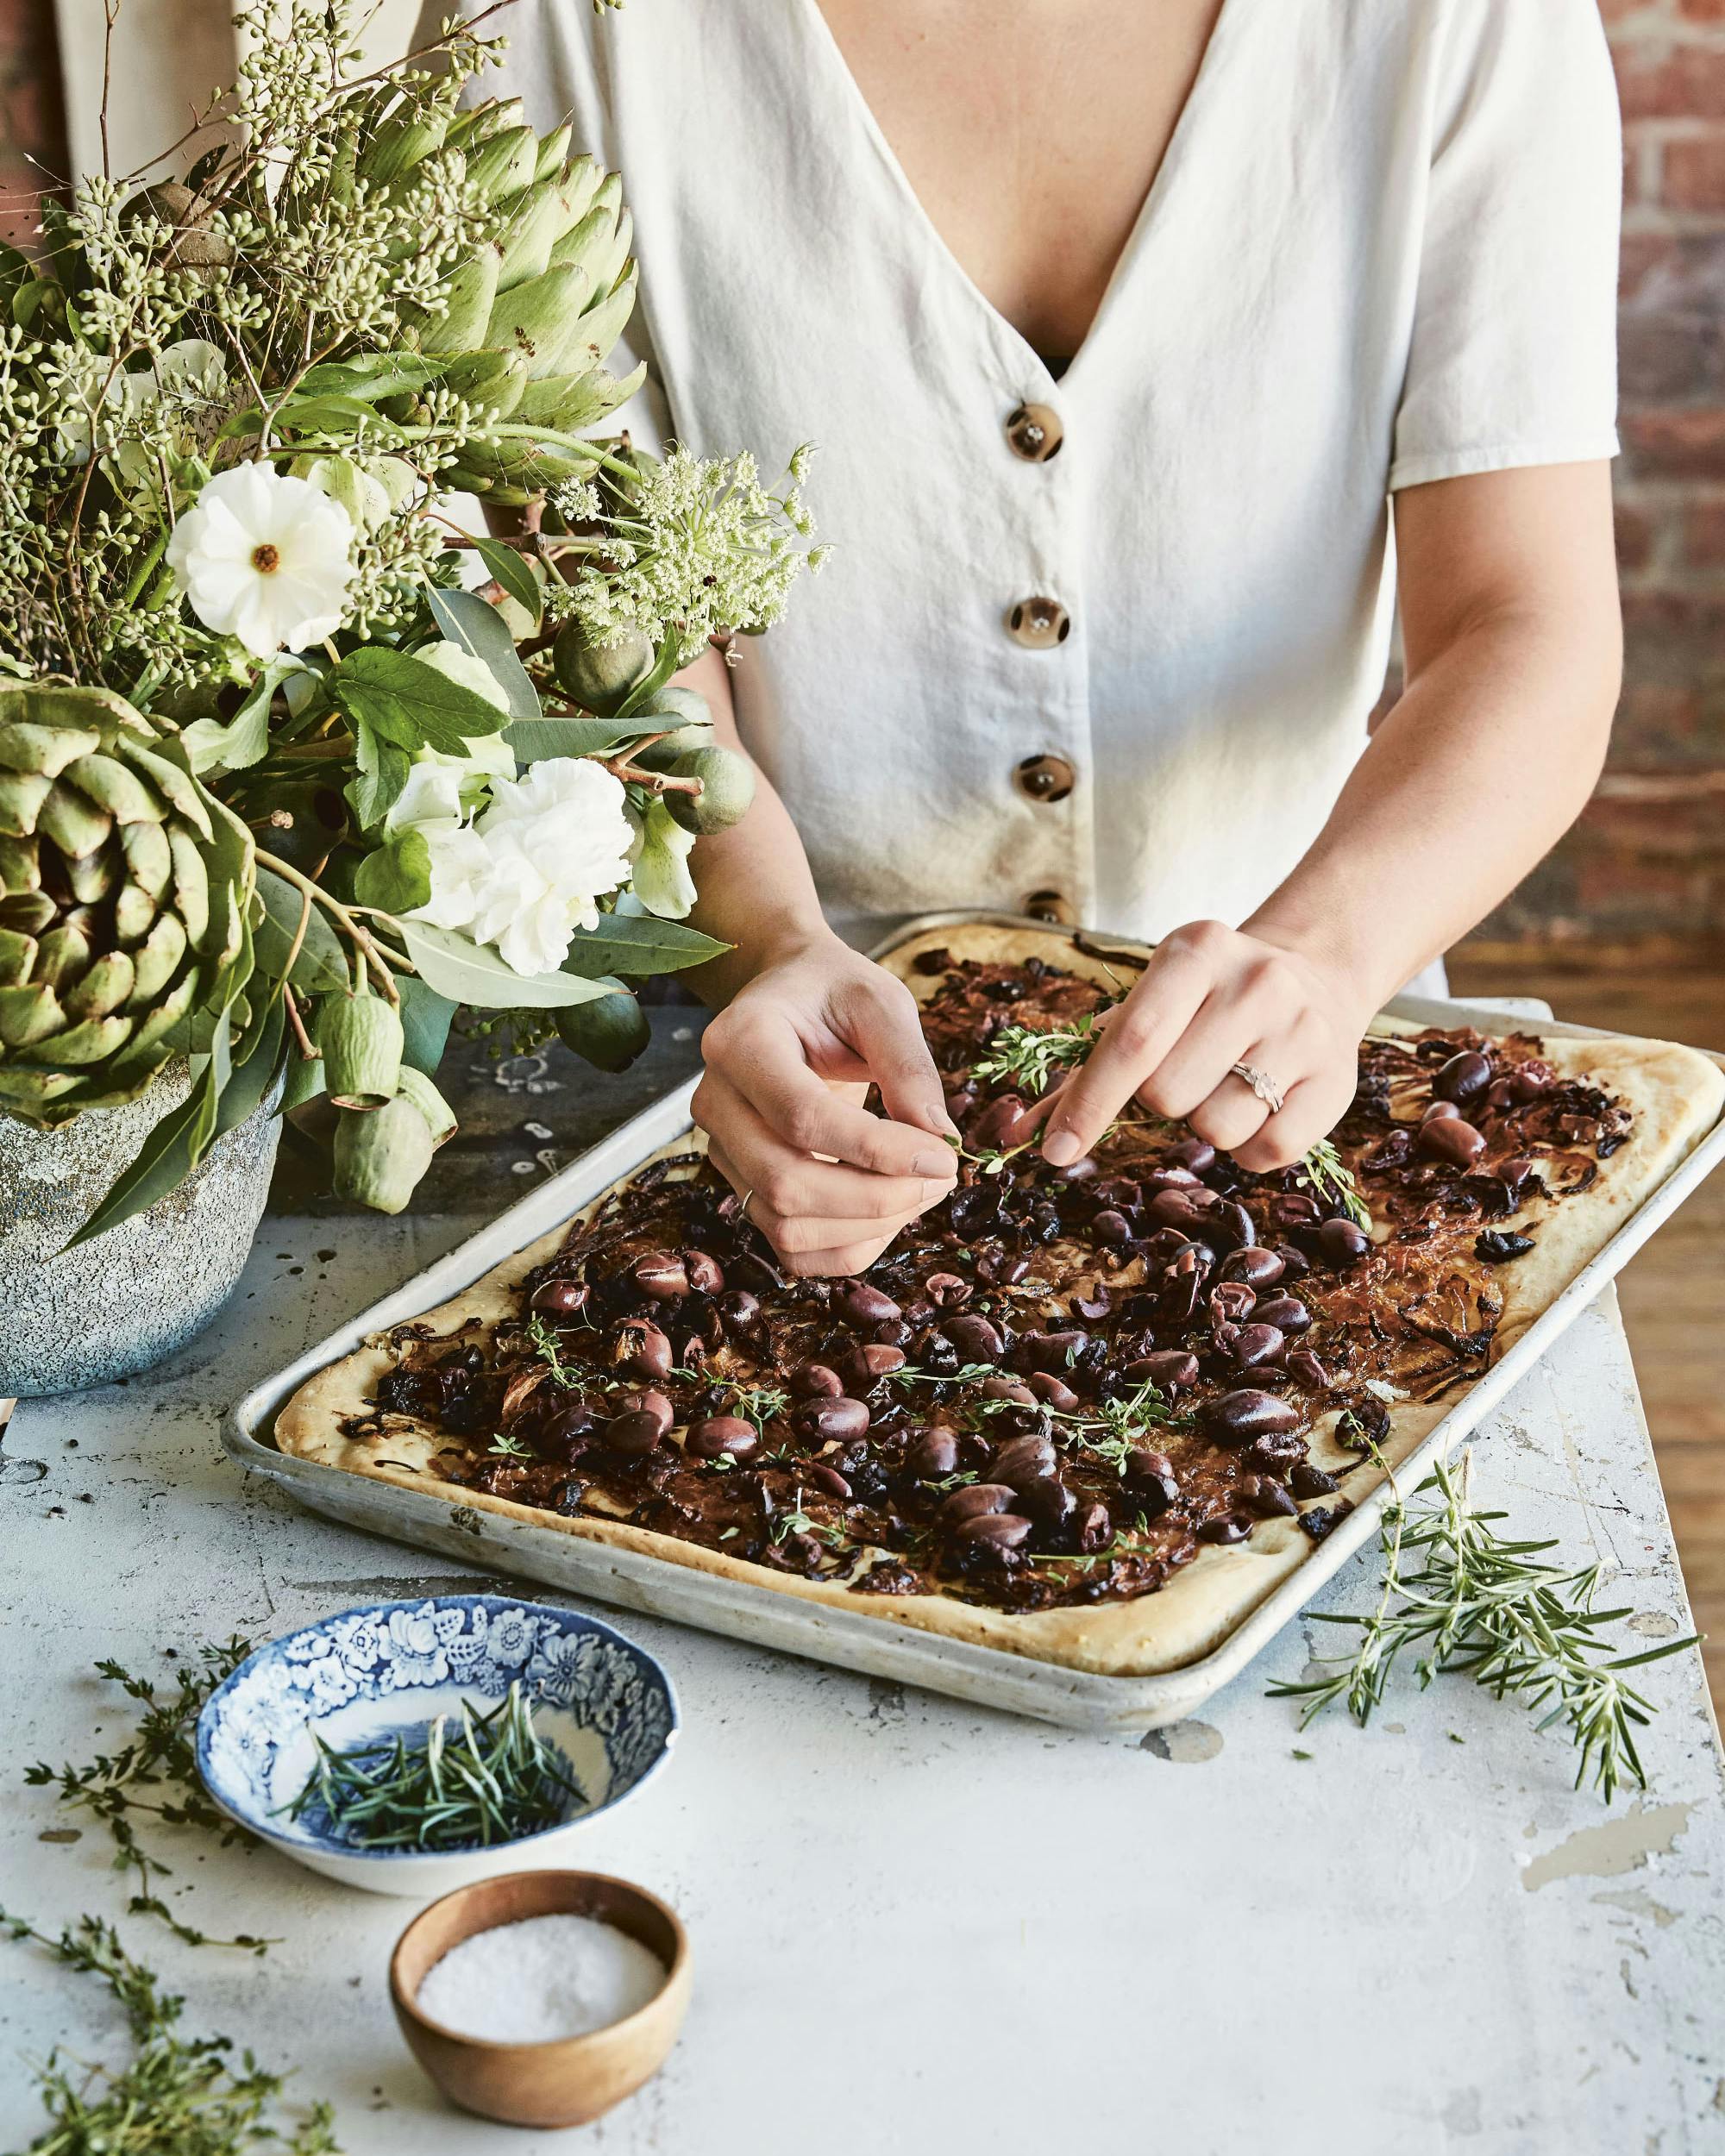 Hands placing herbs on Pissaladiere from maman the cookbook